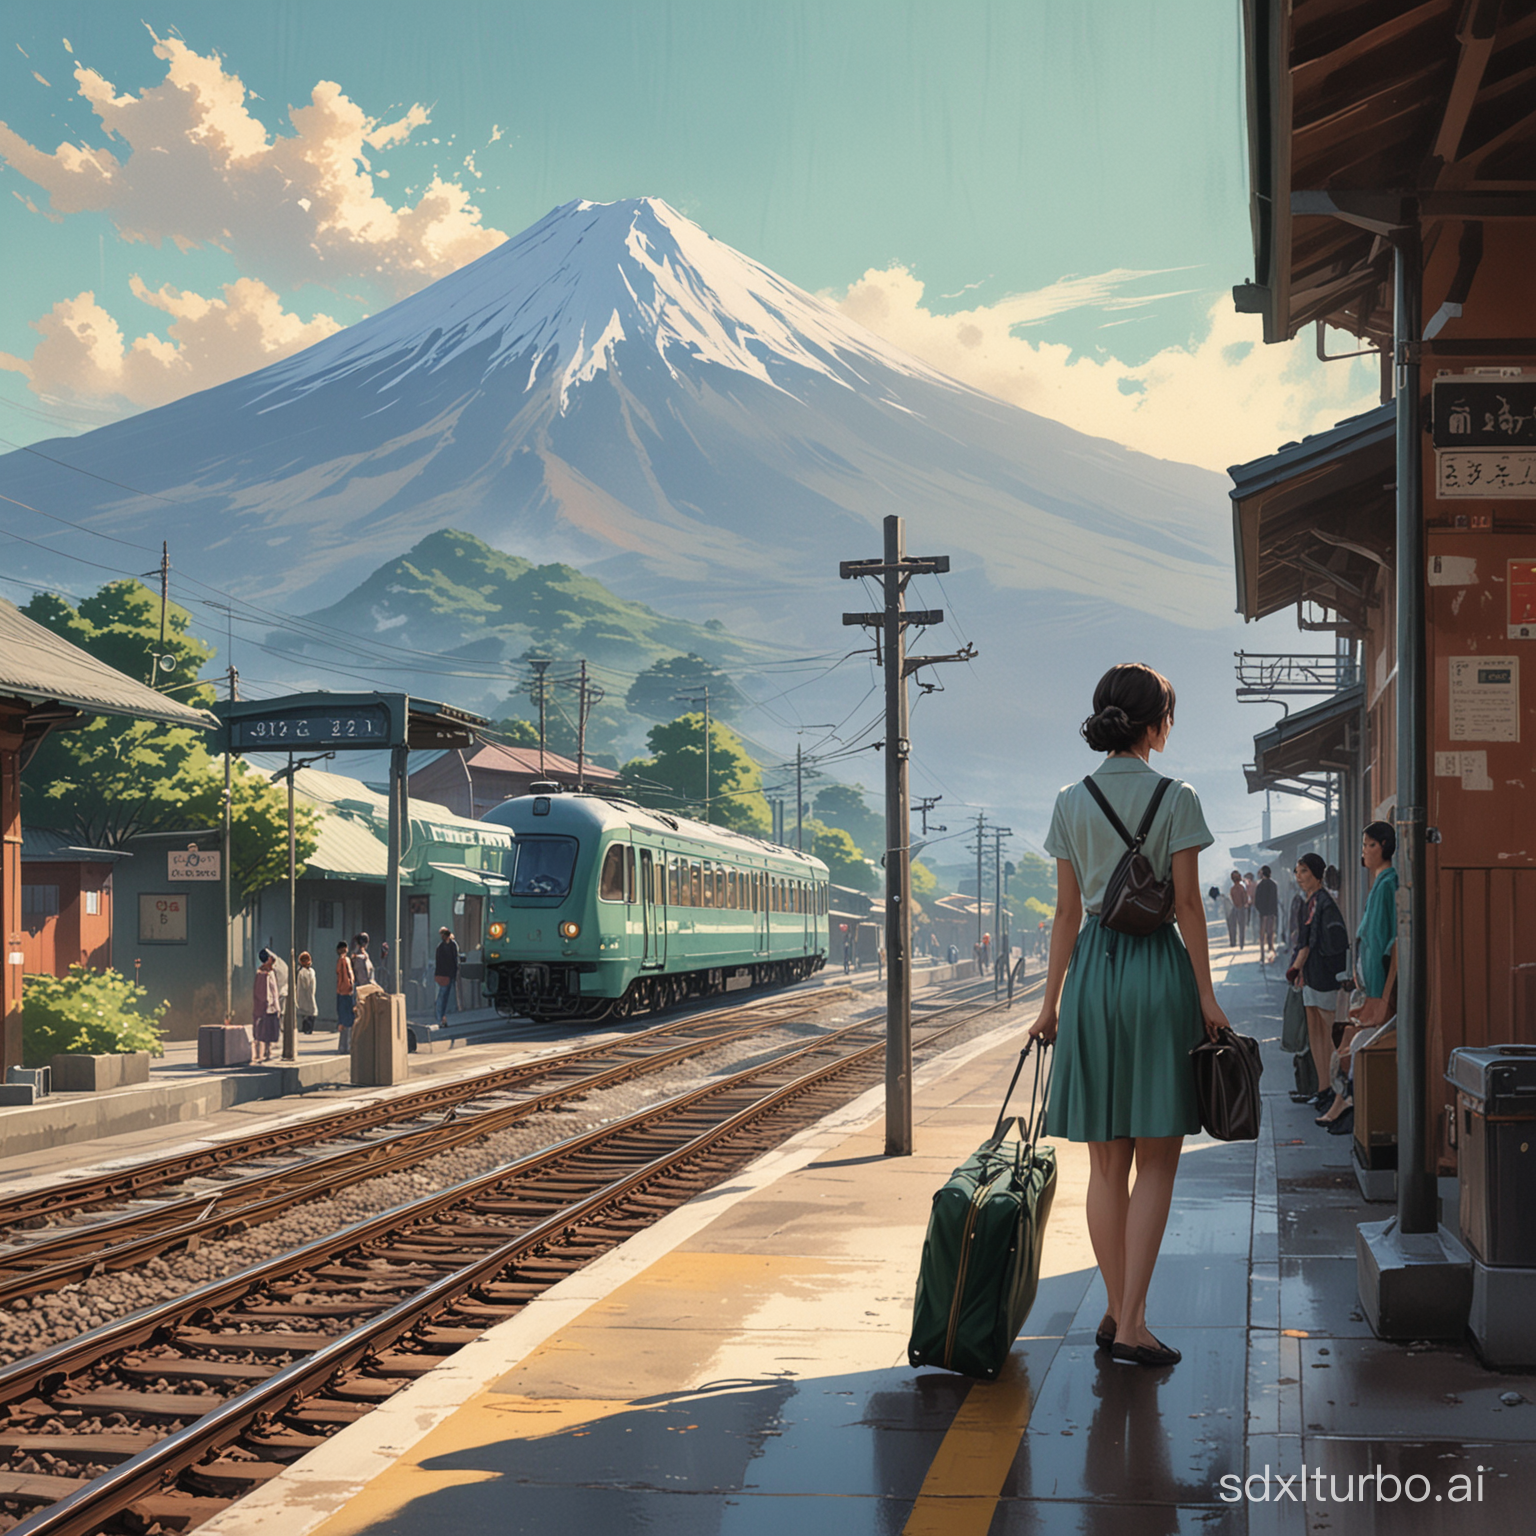 Art style of Alex Ross with muted colors, dominated by tosca color. A tranquil scenery at a village train station, with the majestic Mount Fuji in the background. A girl standing on the platform carrying a travel bag. A train slowly approaching the train station.